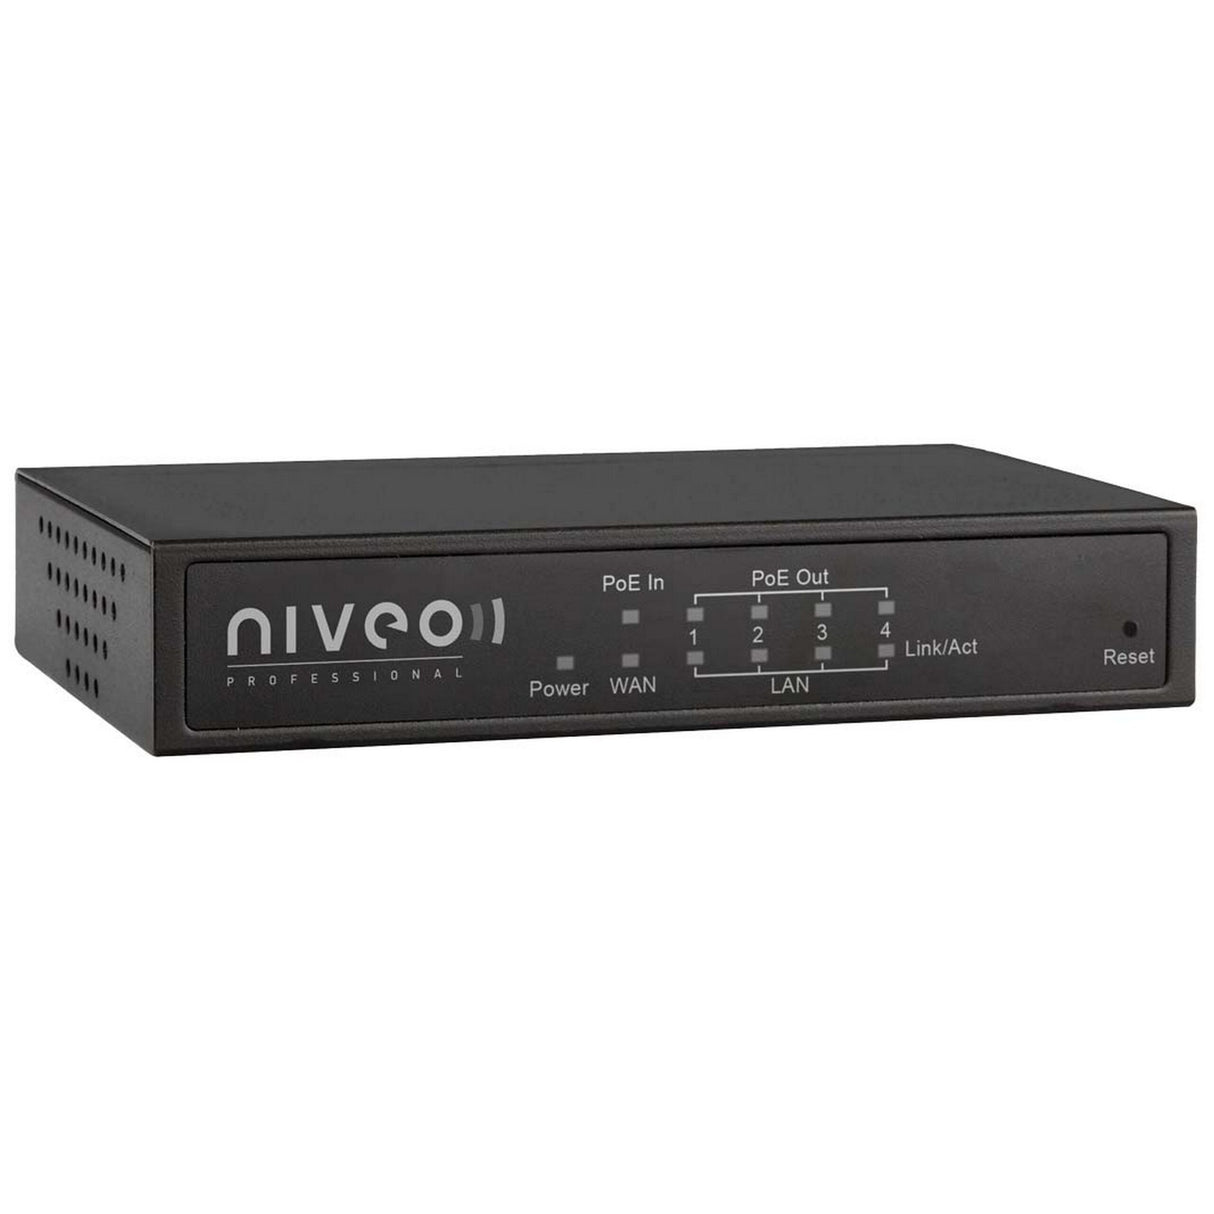 Niveo NR10 Small Form Factor Gigabit Router, 1Gb Wan, Integrated 4 Port GB Switch with PoE Plus